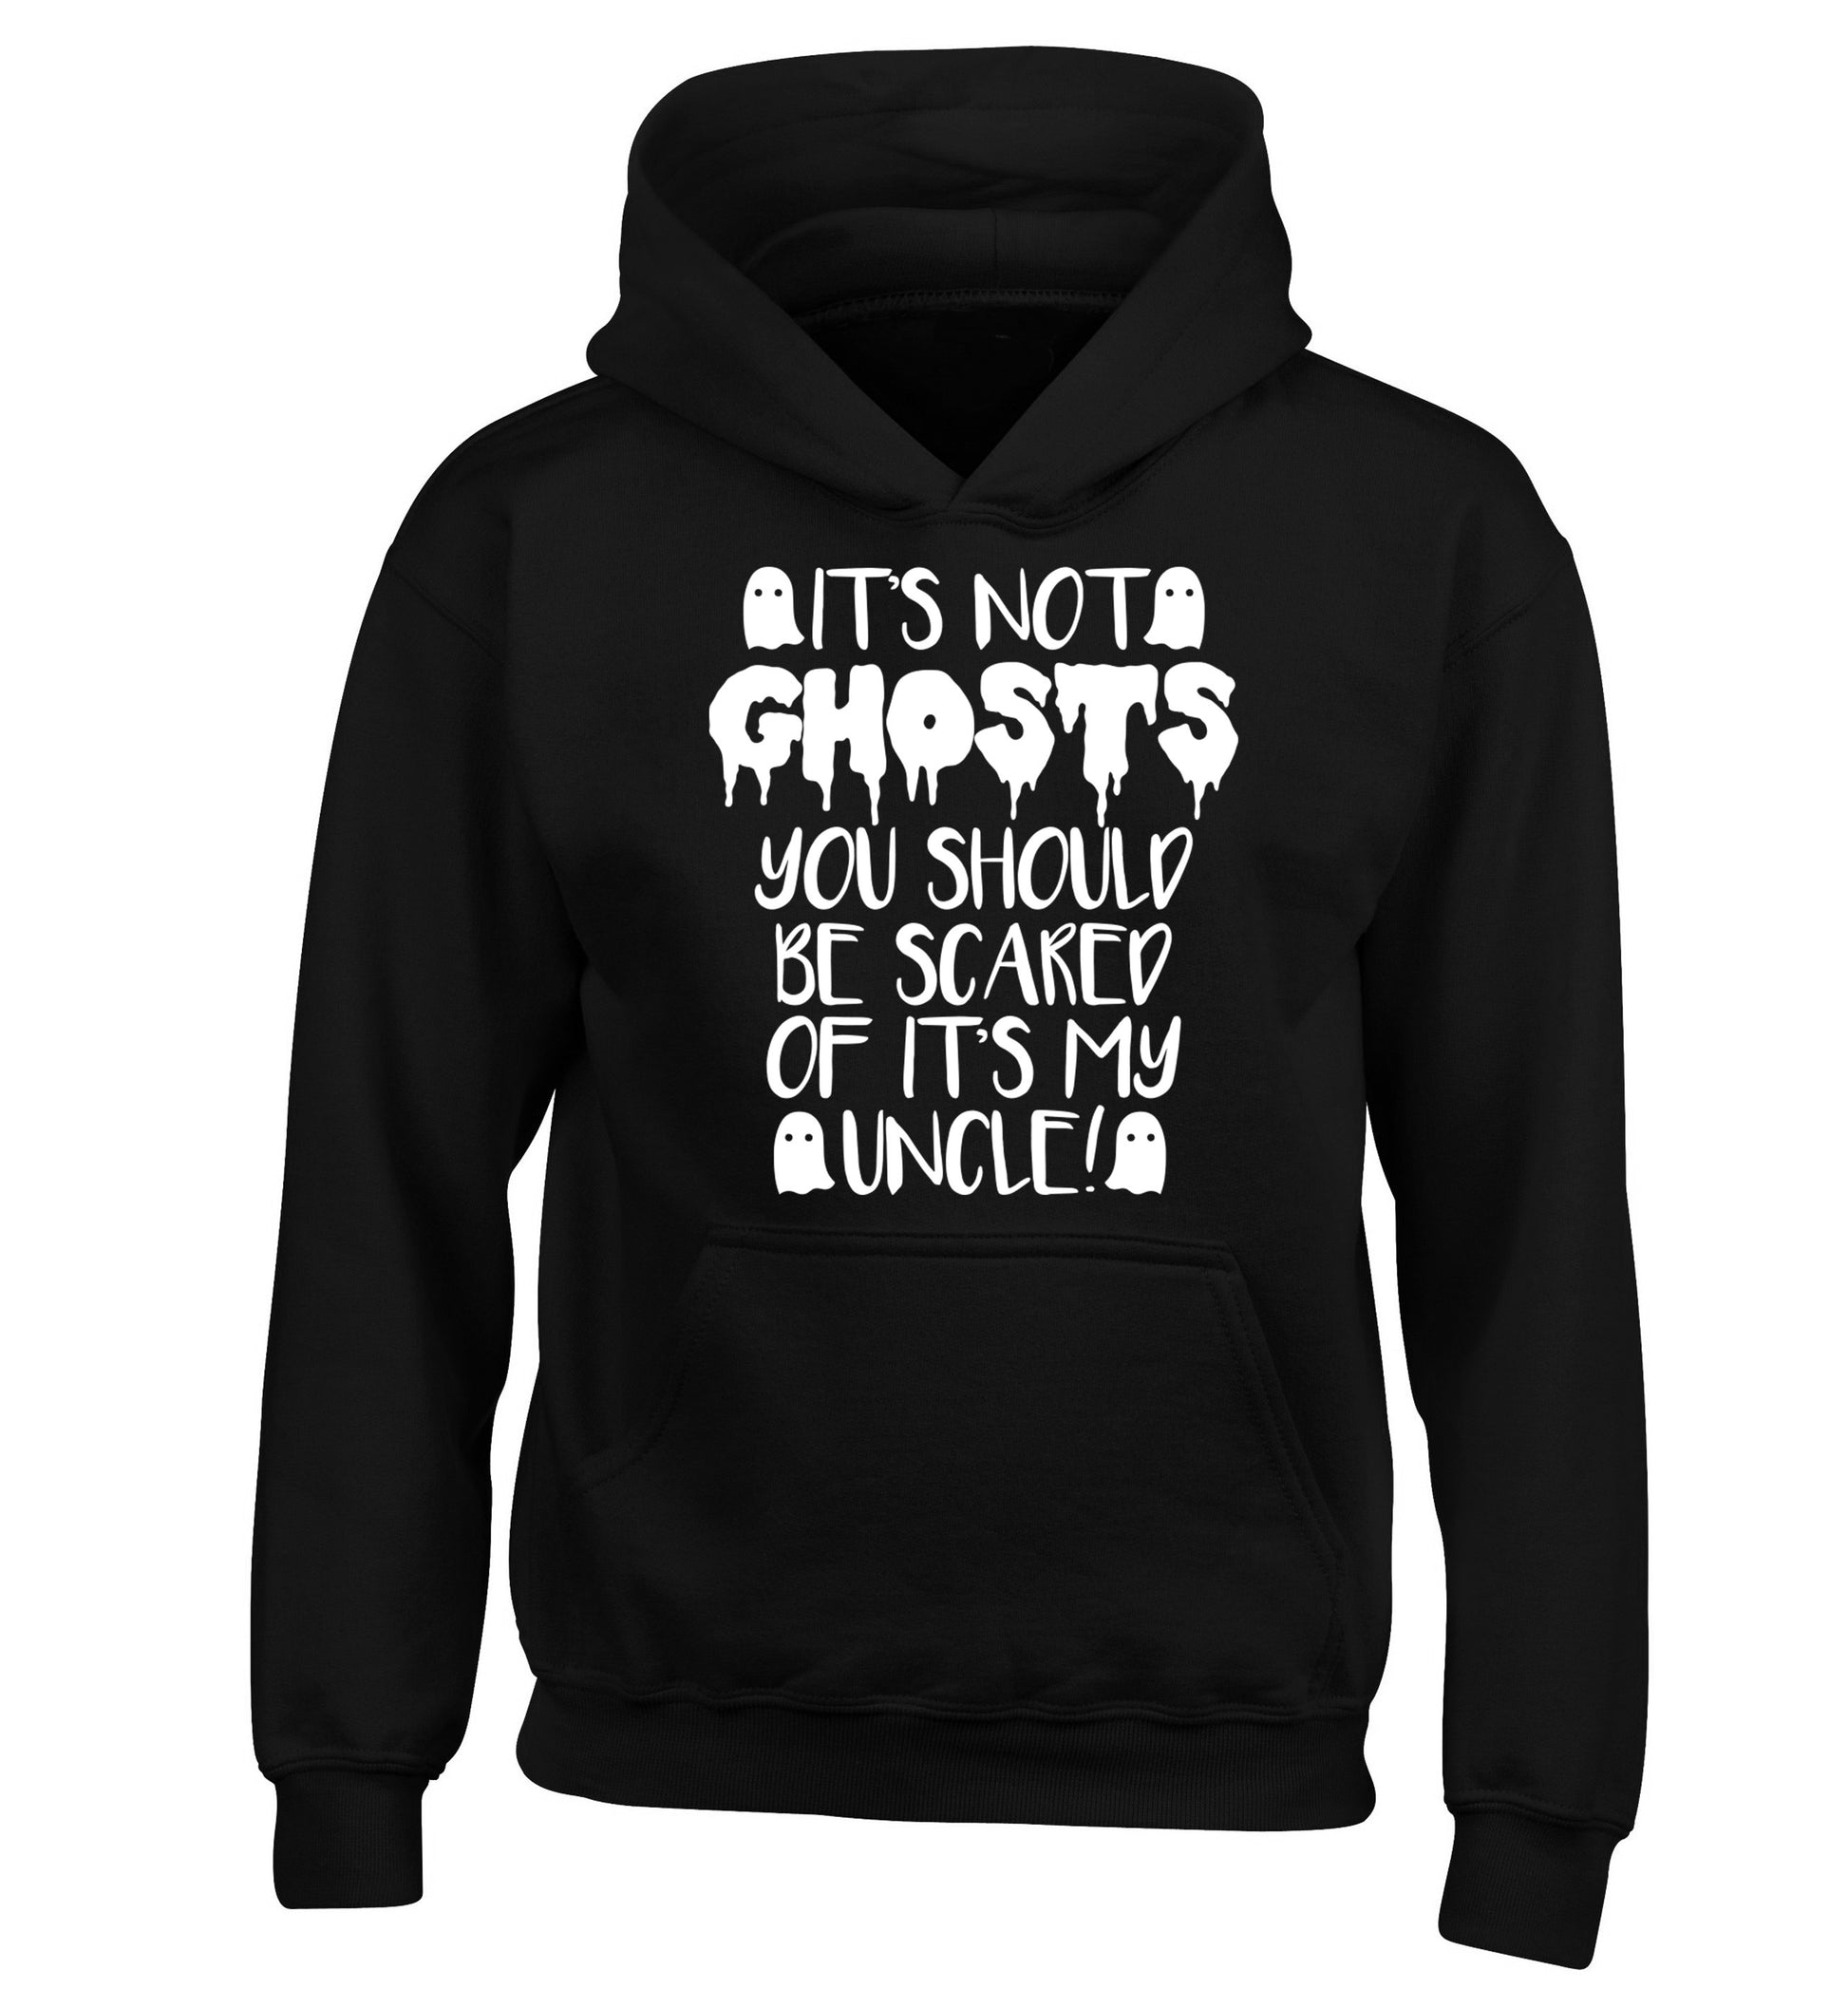 It's not ghosts you should be scared of it's my uncle! children's black hoodie 12-14 Years